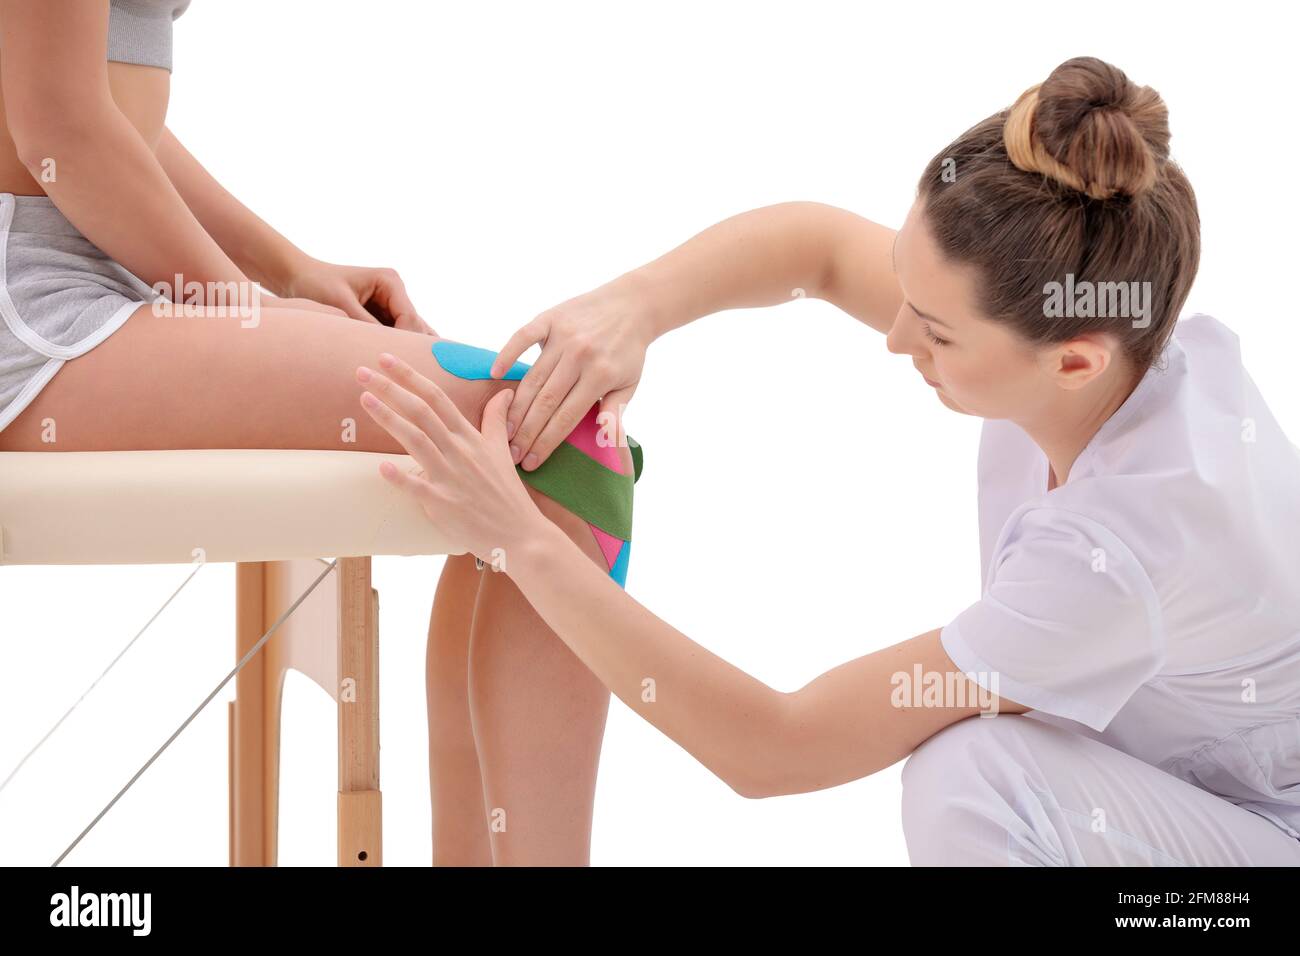 Manual, physio and kinesio therapy techniques performed by female physiotherapist on a training plastic spine and a female patient isolated on white b Stock Photo